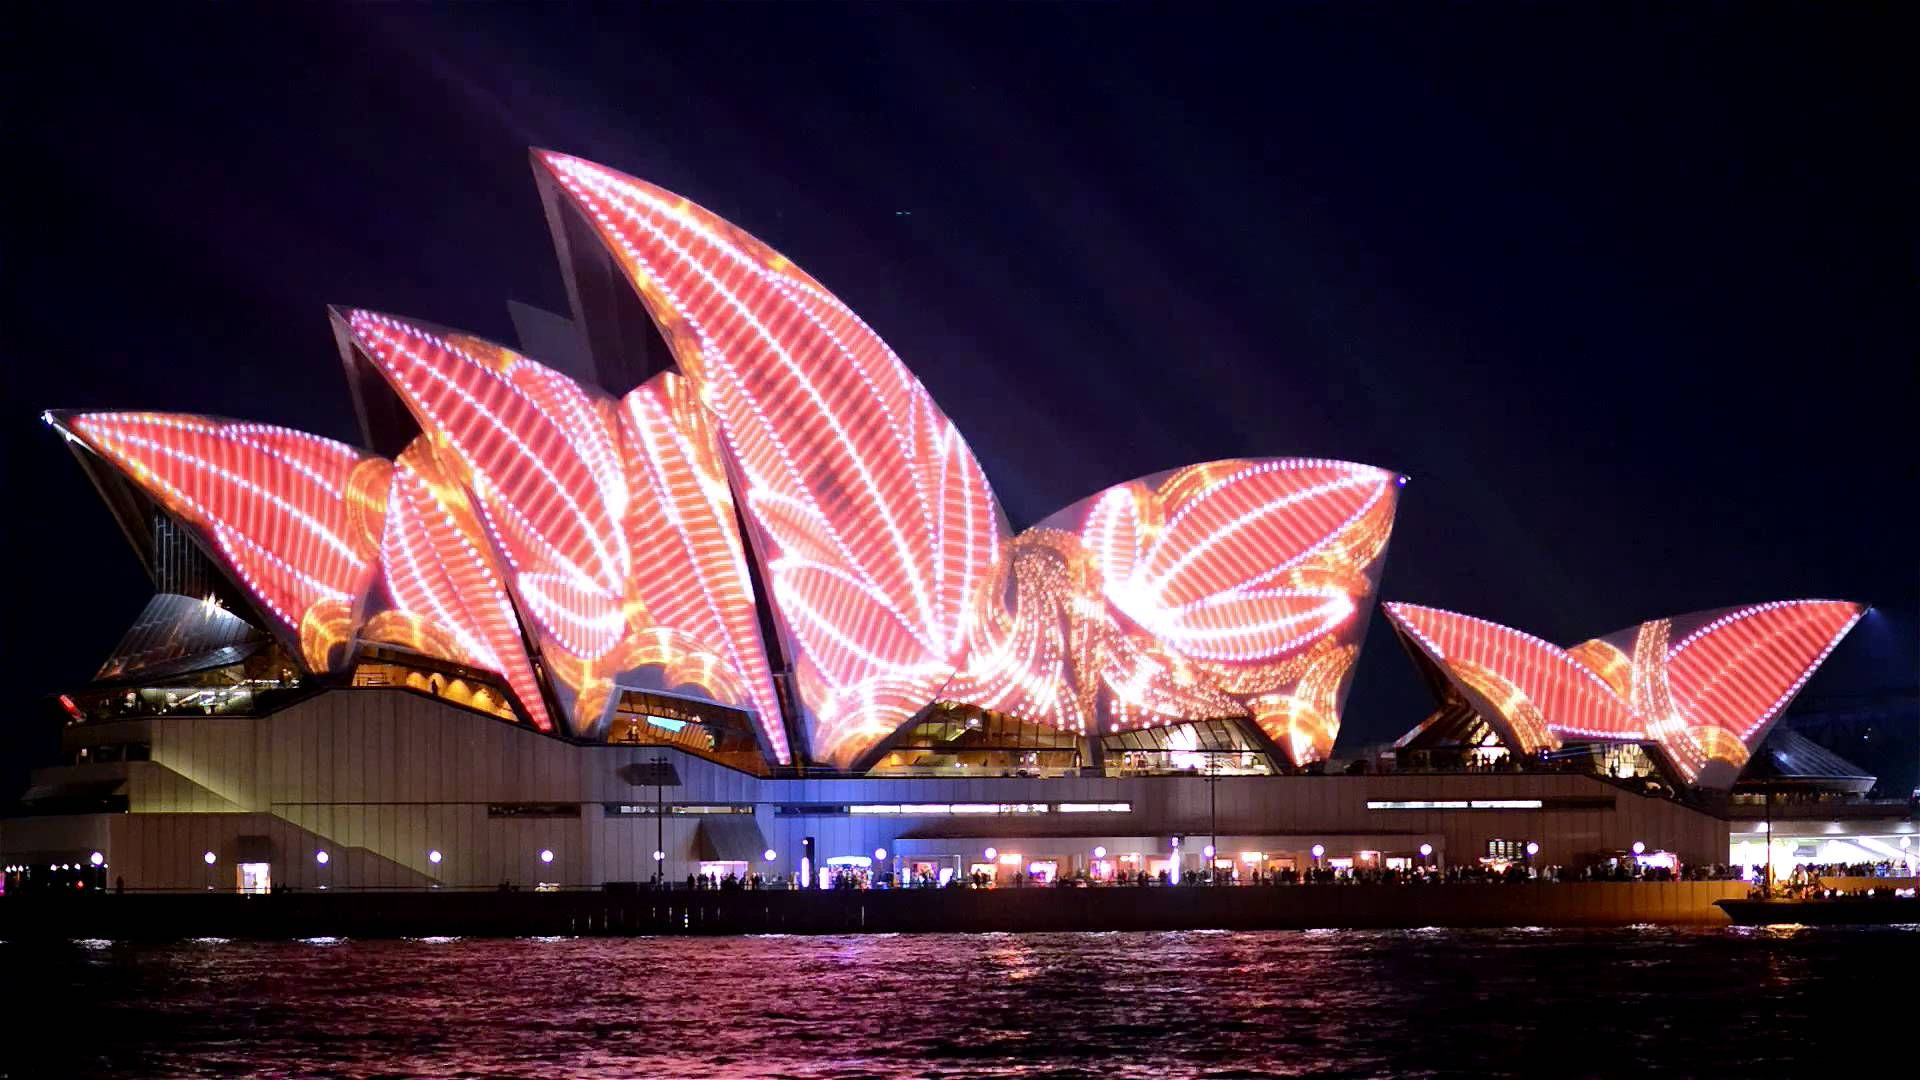 1920x1080 Sydney Opera House 3D Mapping | Desktop wallpapers backgrounds, Projection mapping, Sydney opera house